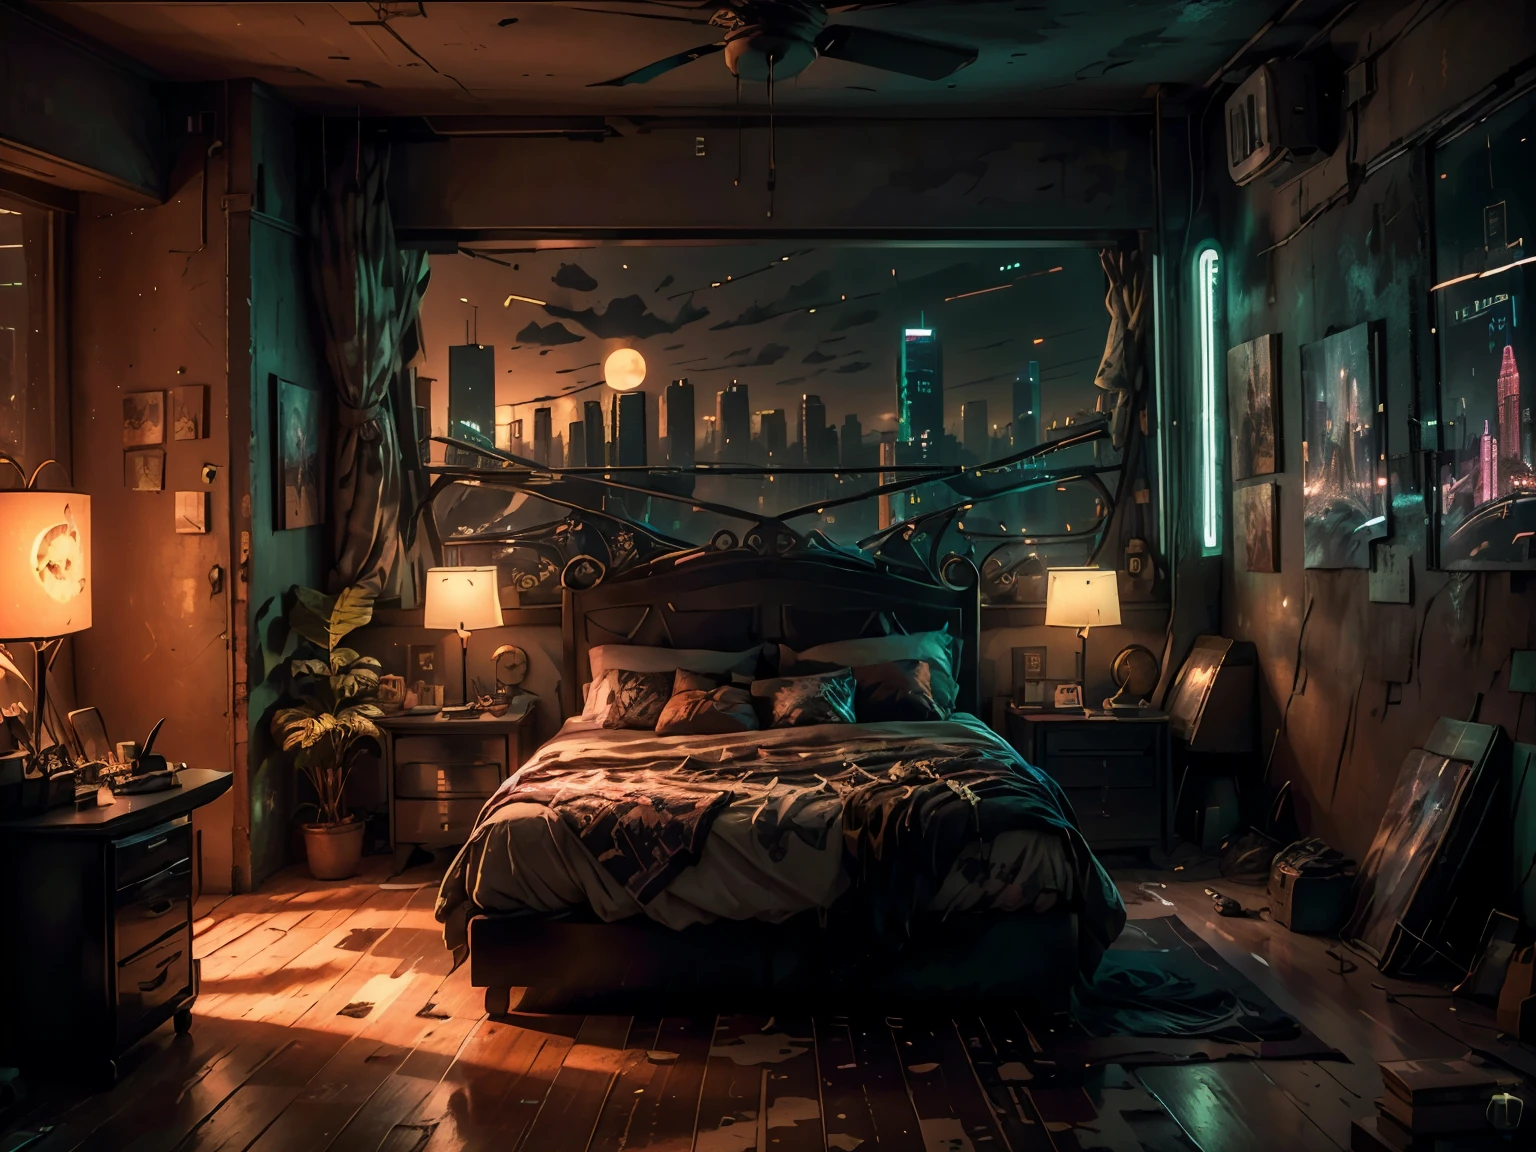 This a (((masterpiece))). Generate a cozy bedroom with a large window directly in front of the camera. The bedroom should be cool and peaceful, with retro furnishings and accessories. Through the window is brilliant cyberpunk city awash with neon light and blinking, colorful signs. It is nighttime, and the city is much brighter than the interior of the room. Contrast the peaceful interior of the bedroom with the busy, ultra-detailed cityscape seen through the window. The perspective of this artwork is from inside the bedroom looking out. 